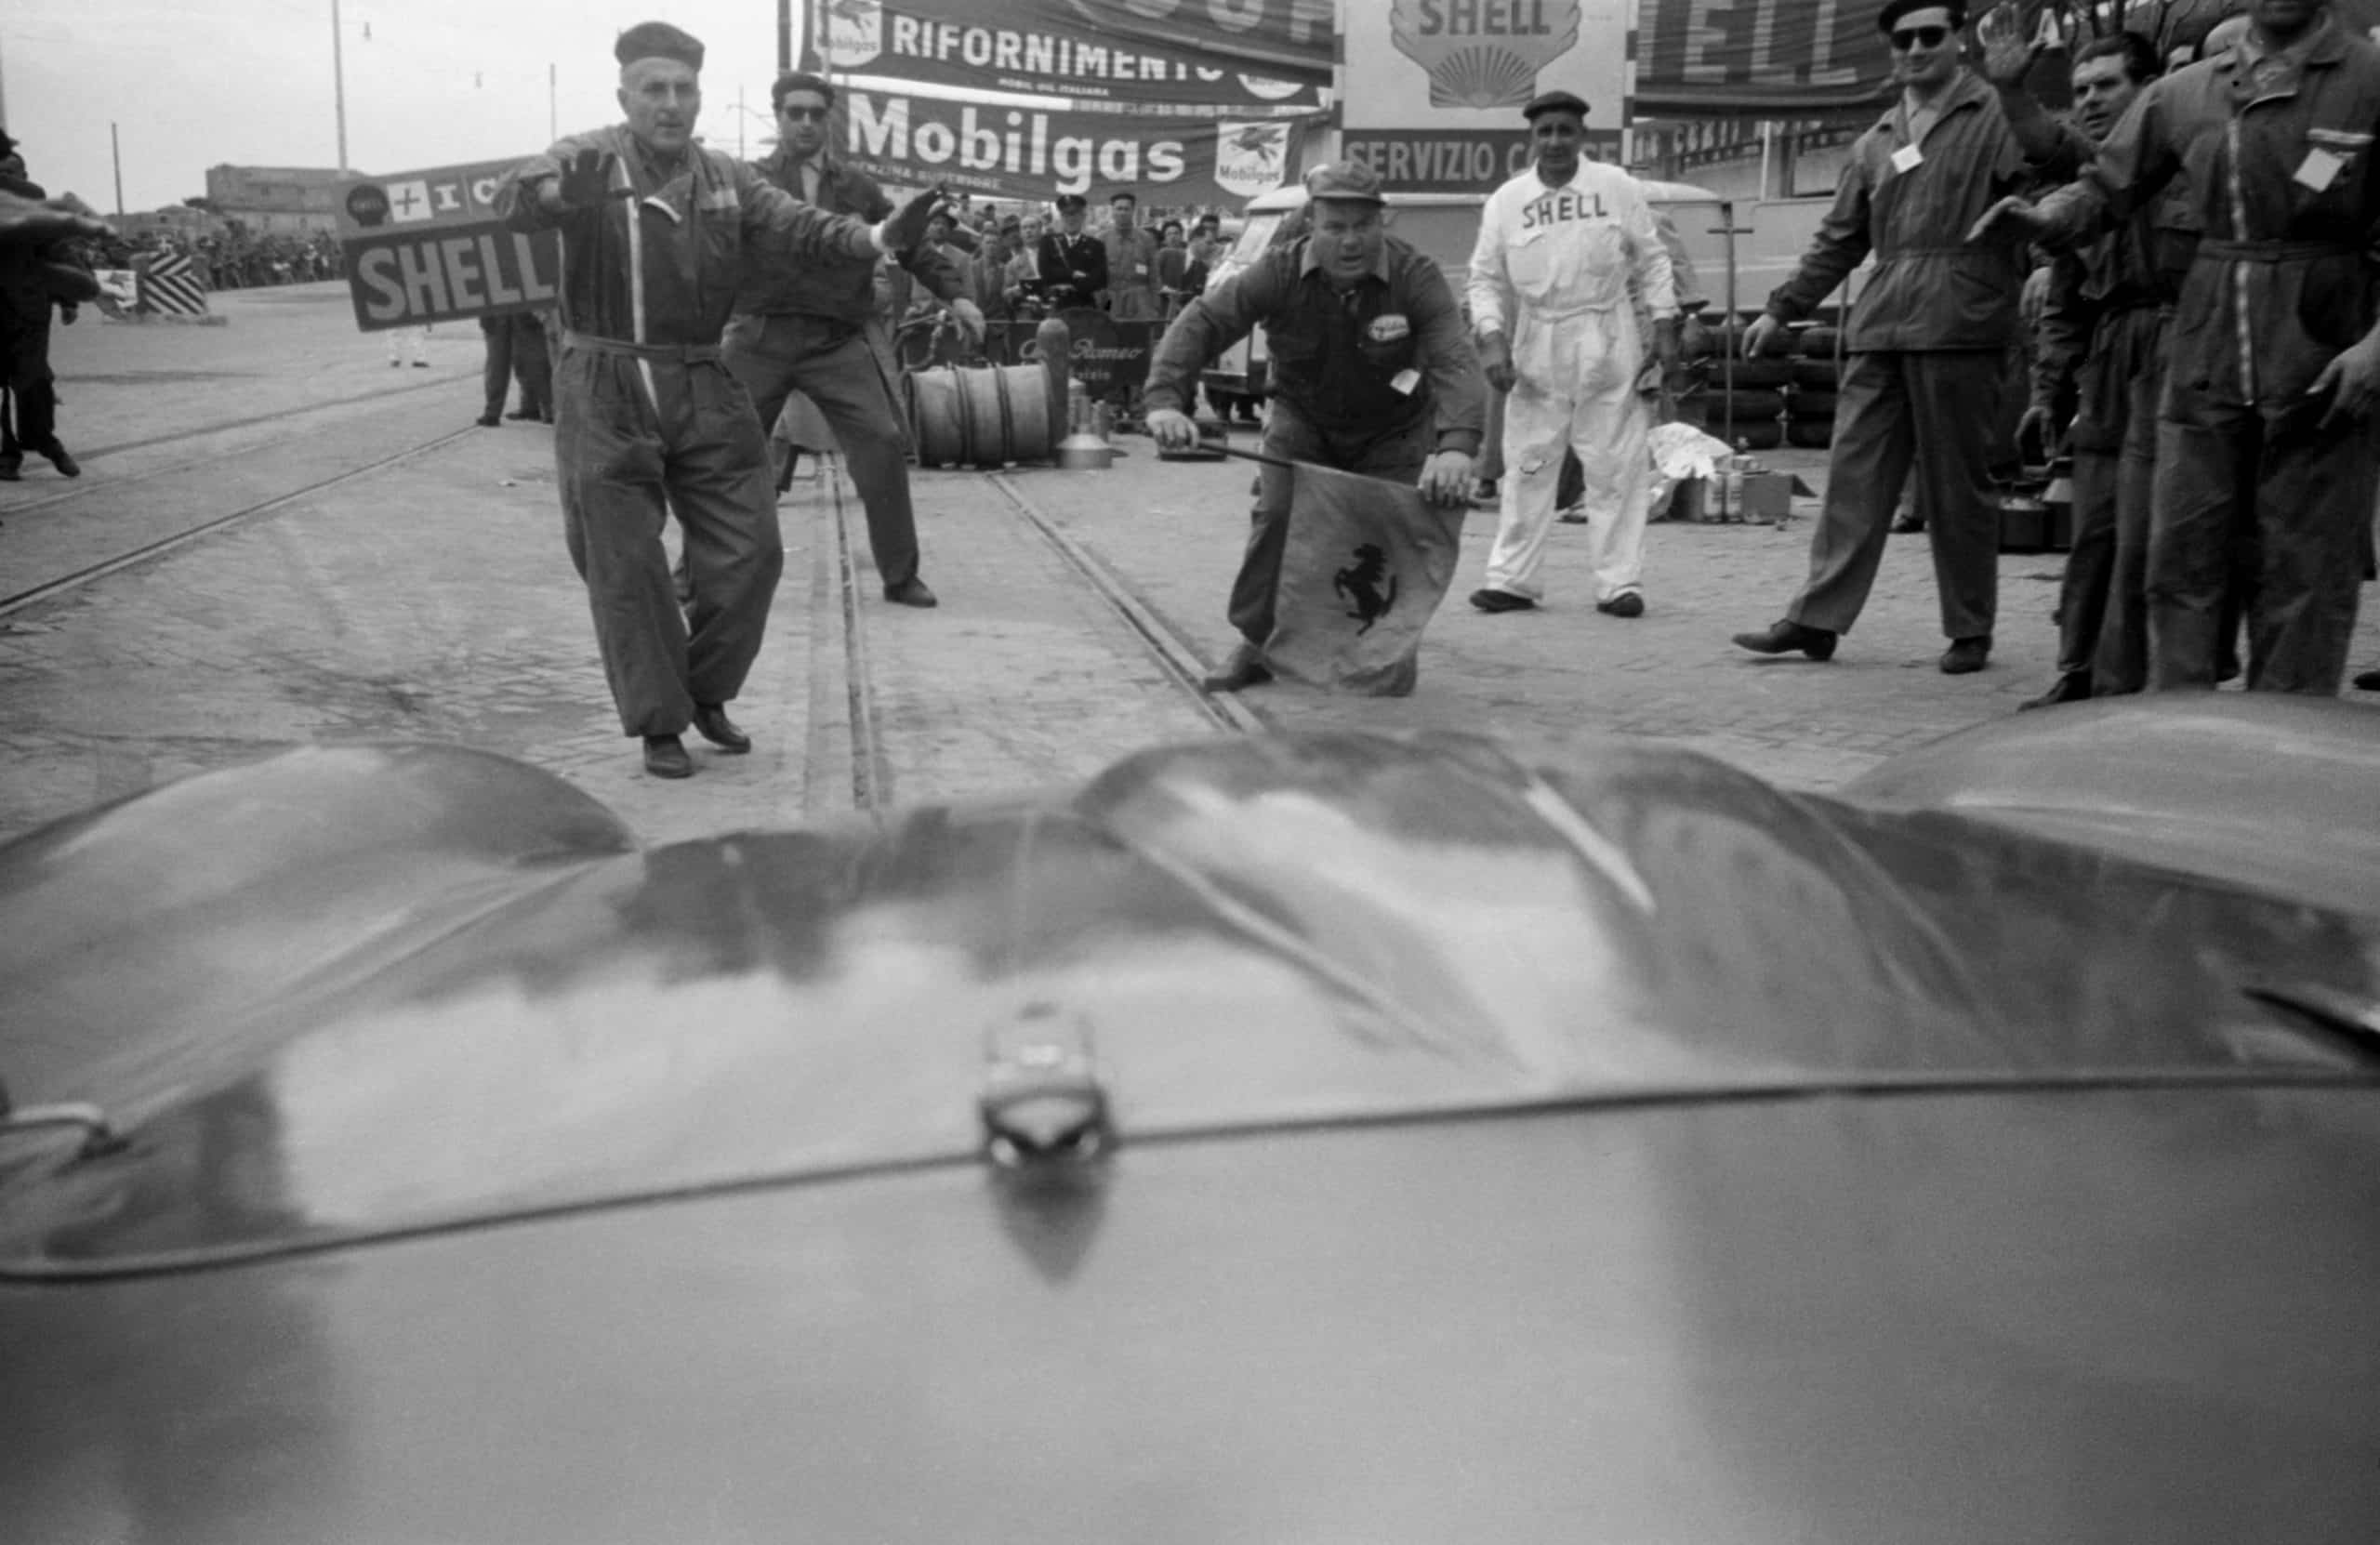 The Ferrari driven by Peter Collins and Louis Klemantaski arrives in the pit lane for refuelling during the Mille Miglia, April 1956. Louis Klemantaski: 'Coming in at high speed for our second refuelling, my heart stopped when the waiting mechanics were about to be annihilated. But such was their faith that they stood their ground and we halted just as the bonnet touched Parenti?s flag.' (Photo by Klemantaski Collection/Getty Images)